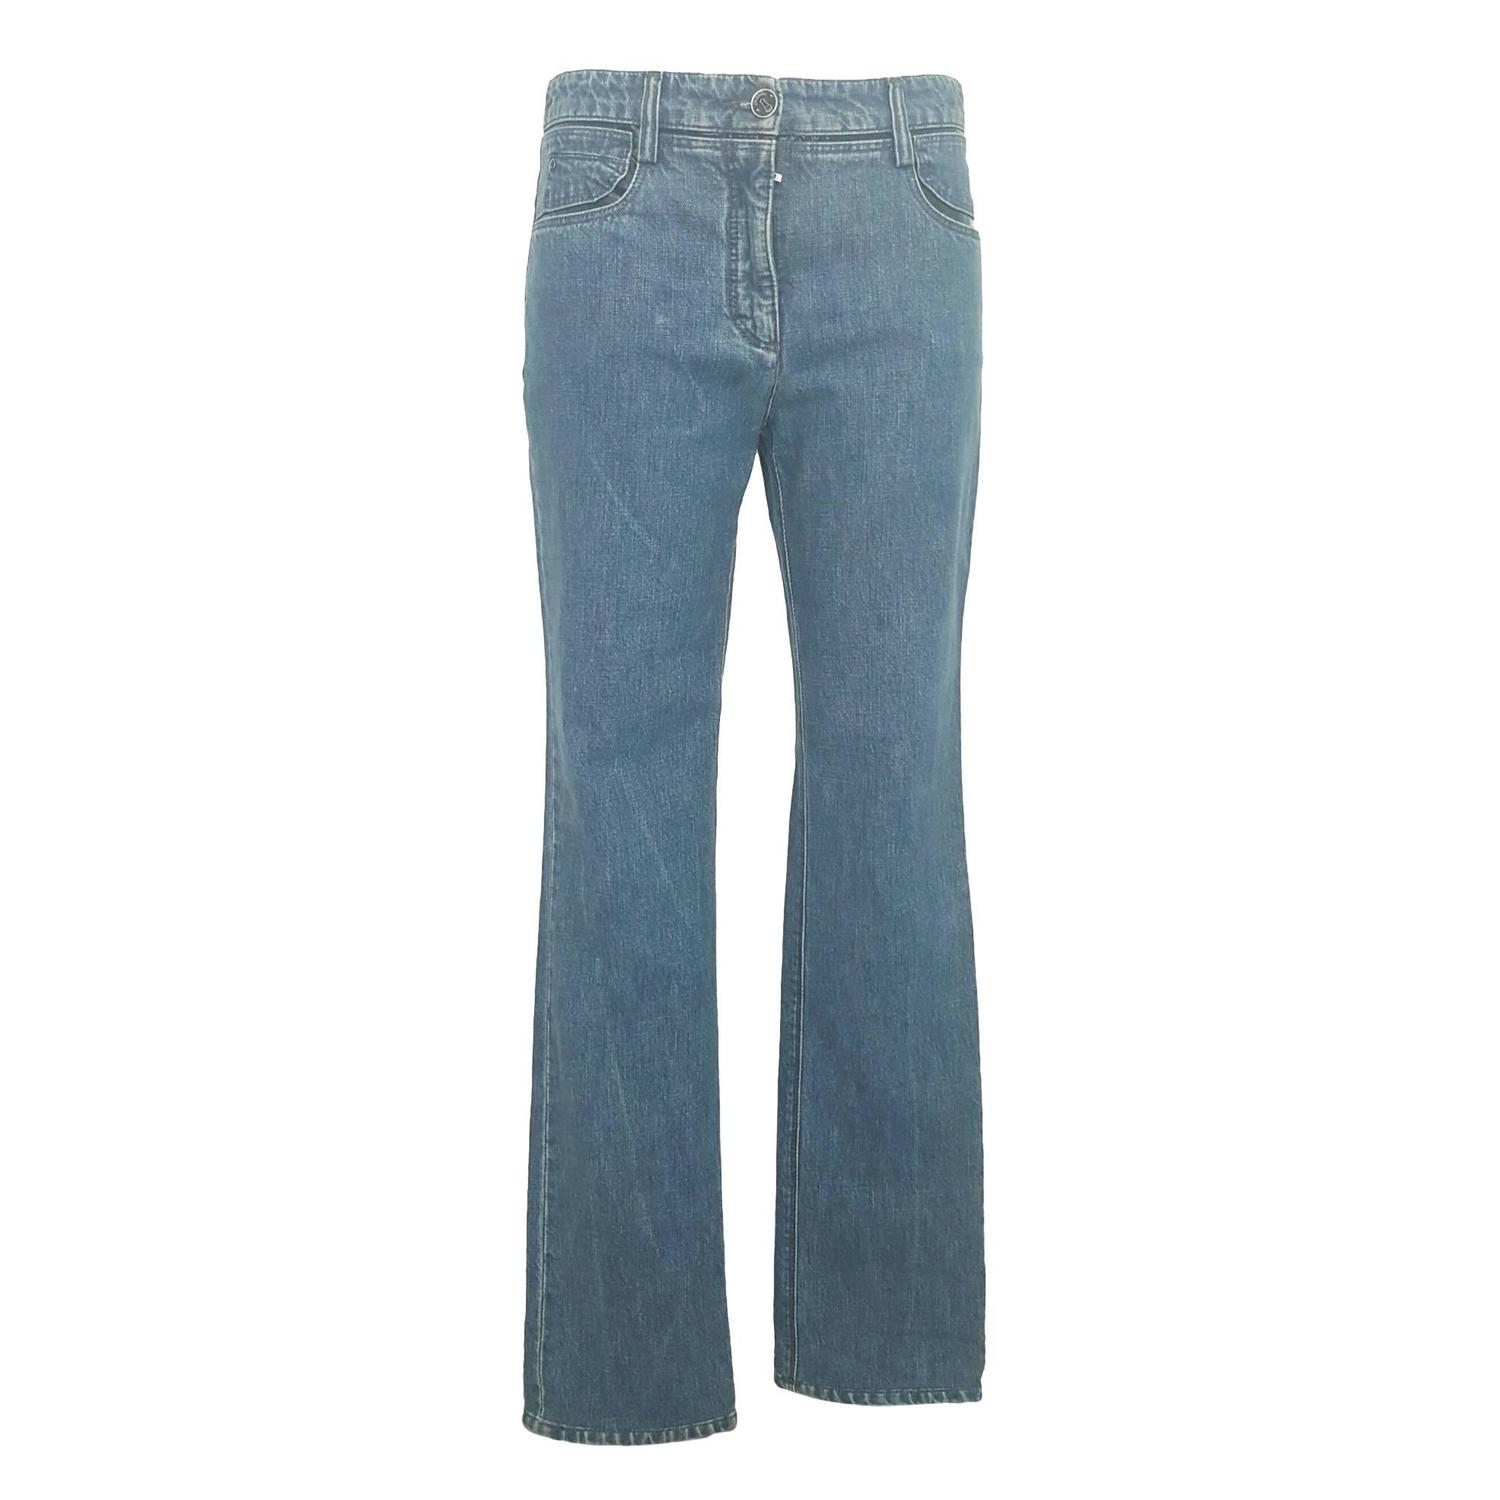 2000s Chanel jeans For Sale at 1stdibs